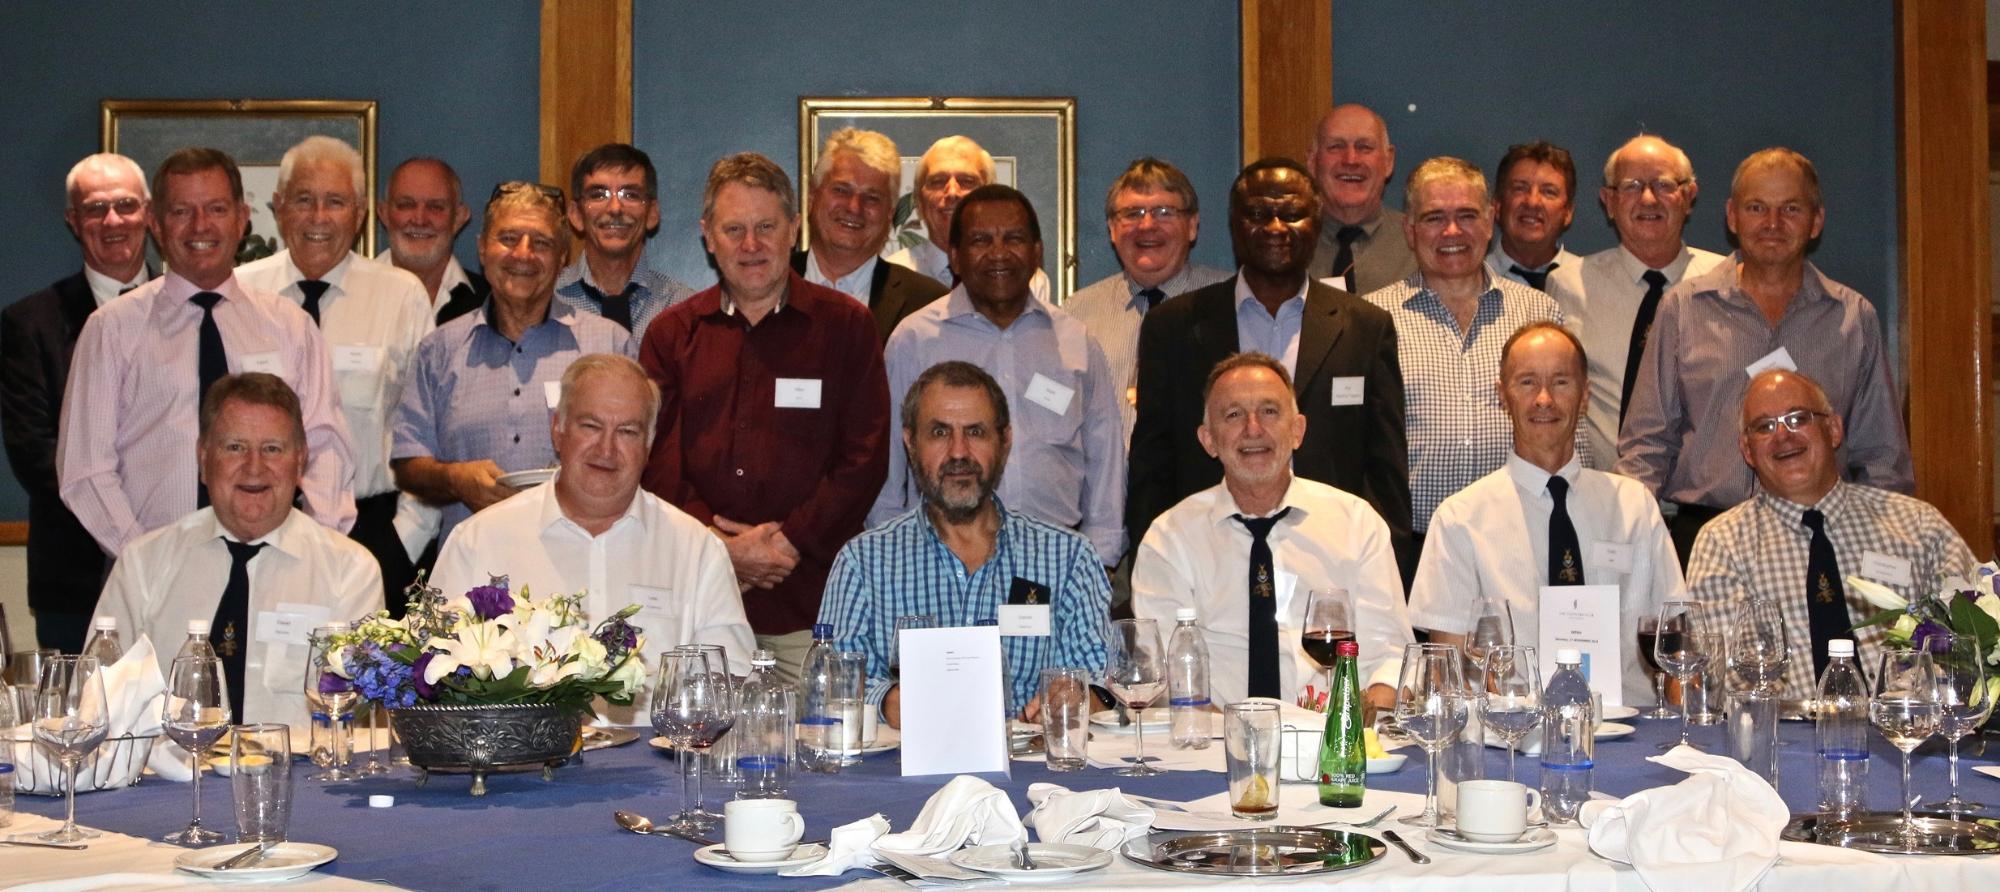 Class of 1978 civil engineers at their 2018 reunion